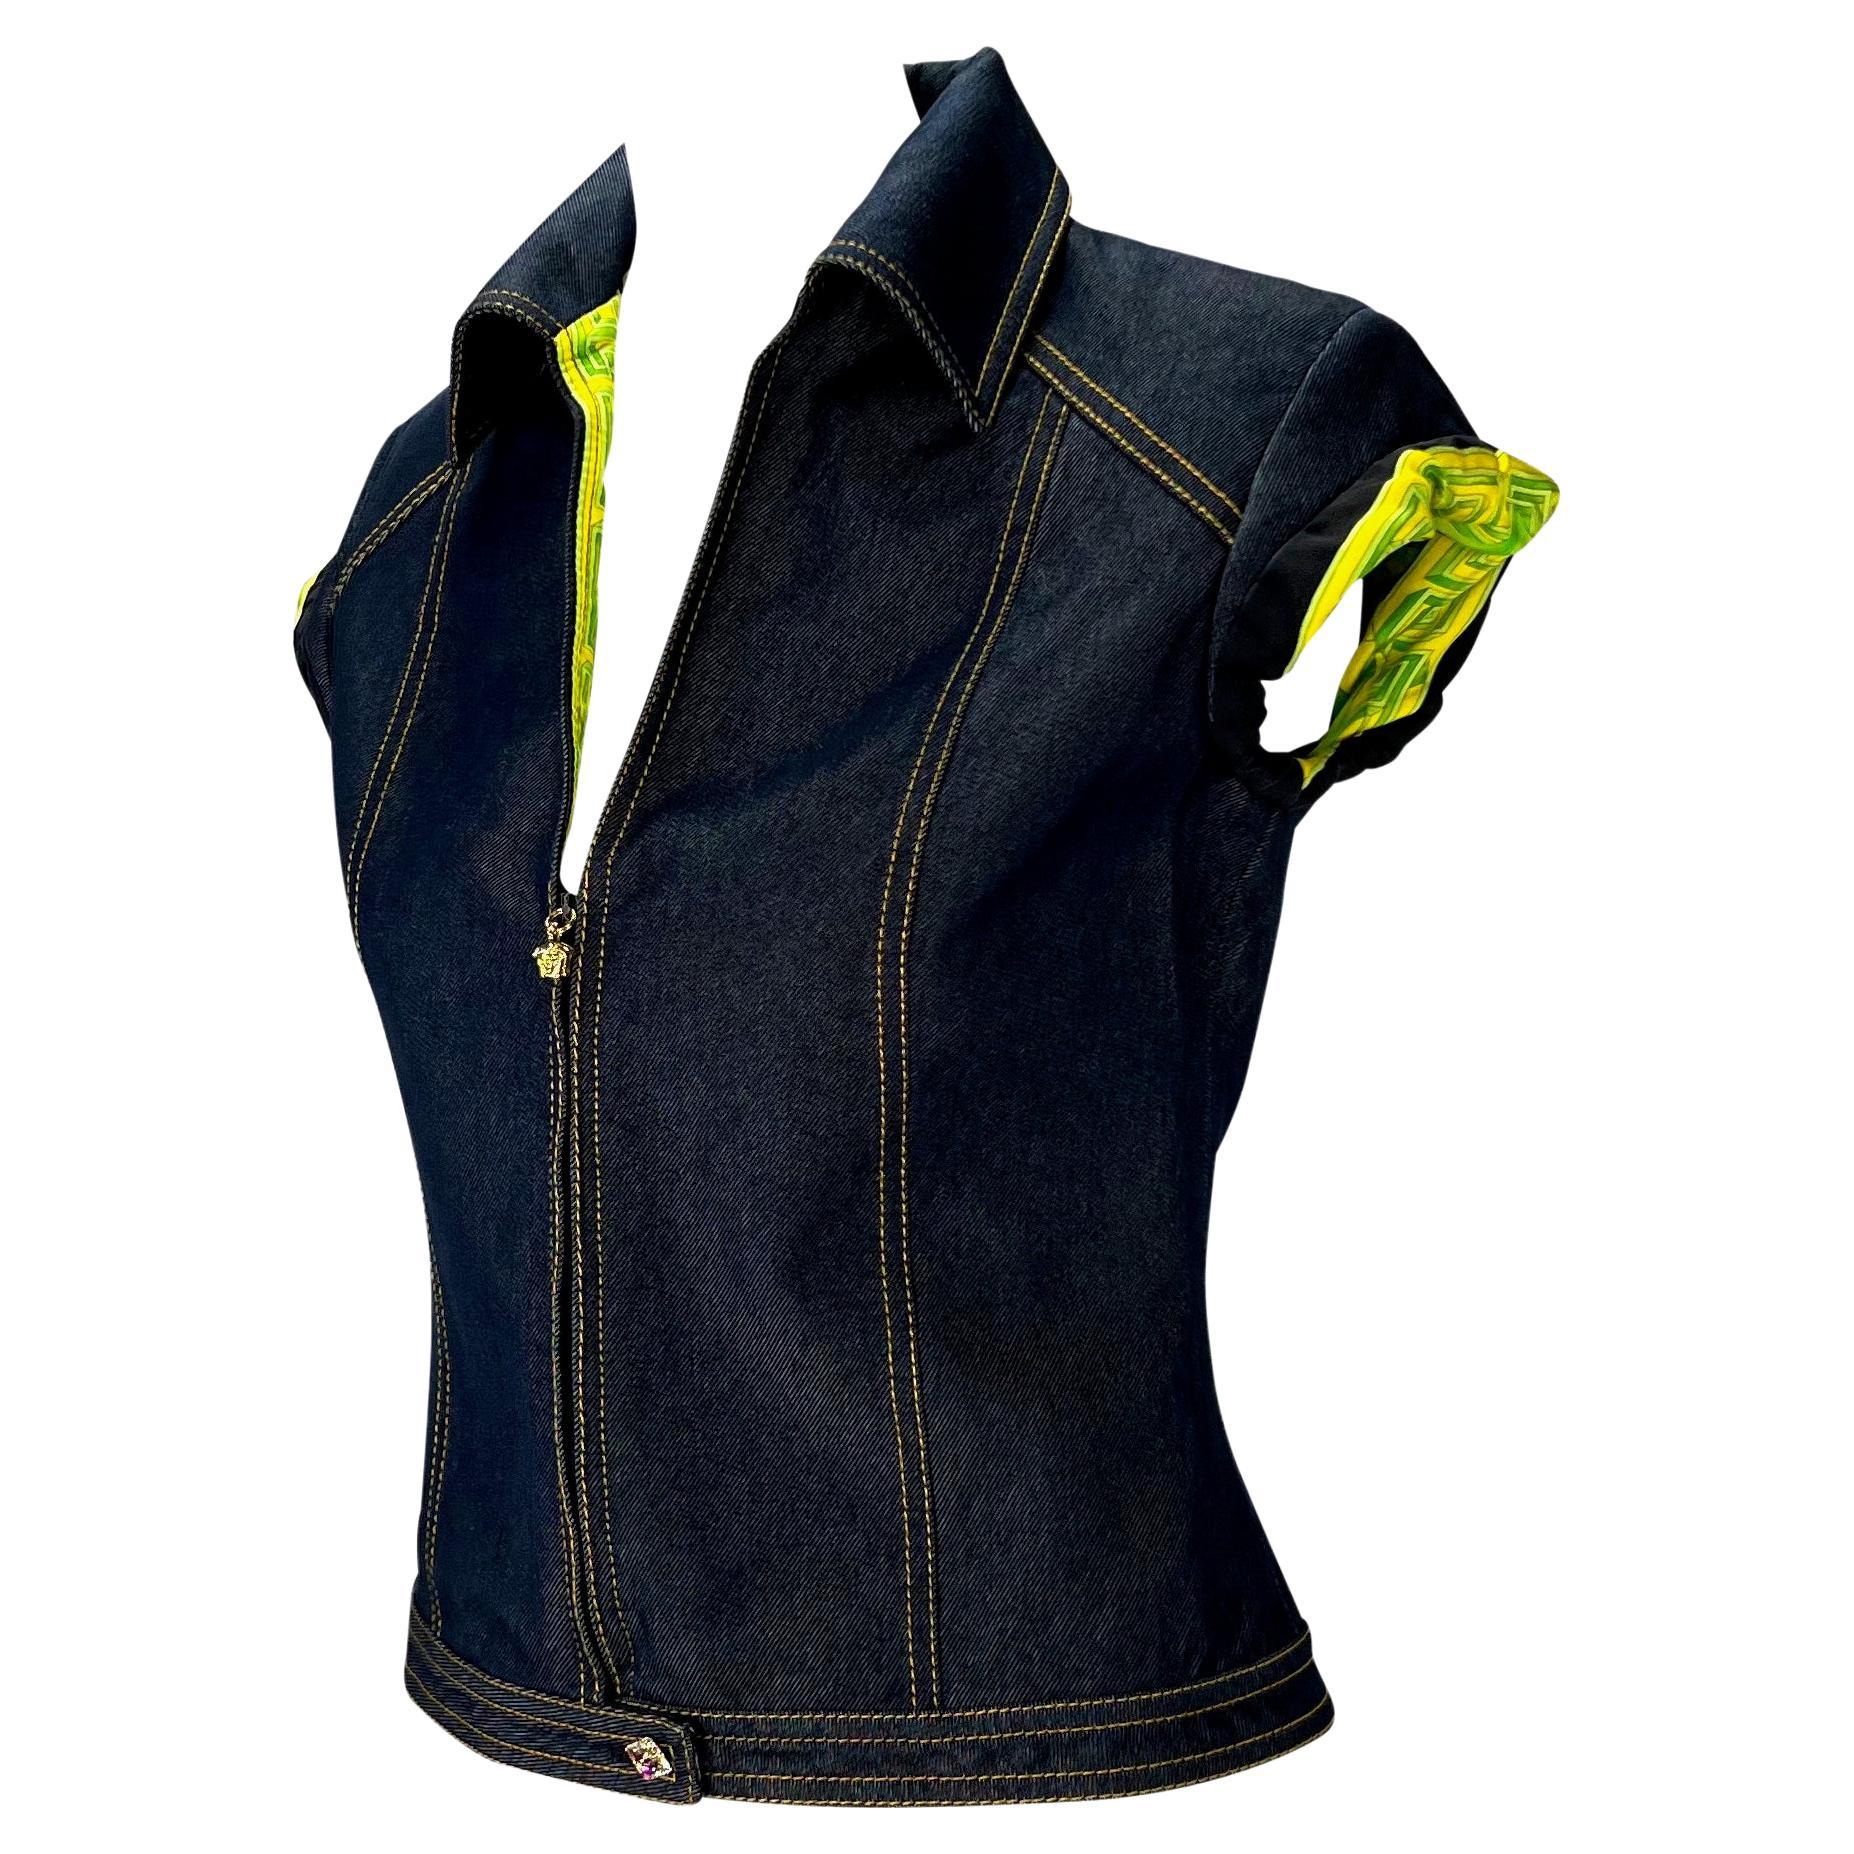 Presenting a denim zip-up Gianni Versace Couture shirt, designed by Donatella Versace. From the Spring/Summer 2000 collection, this tailored denim shirt/vest features a collar, a half-zip closure with gold Versace Medusa zipper pull, orchid jungle